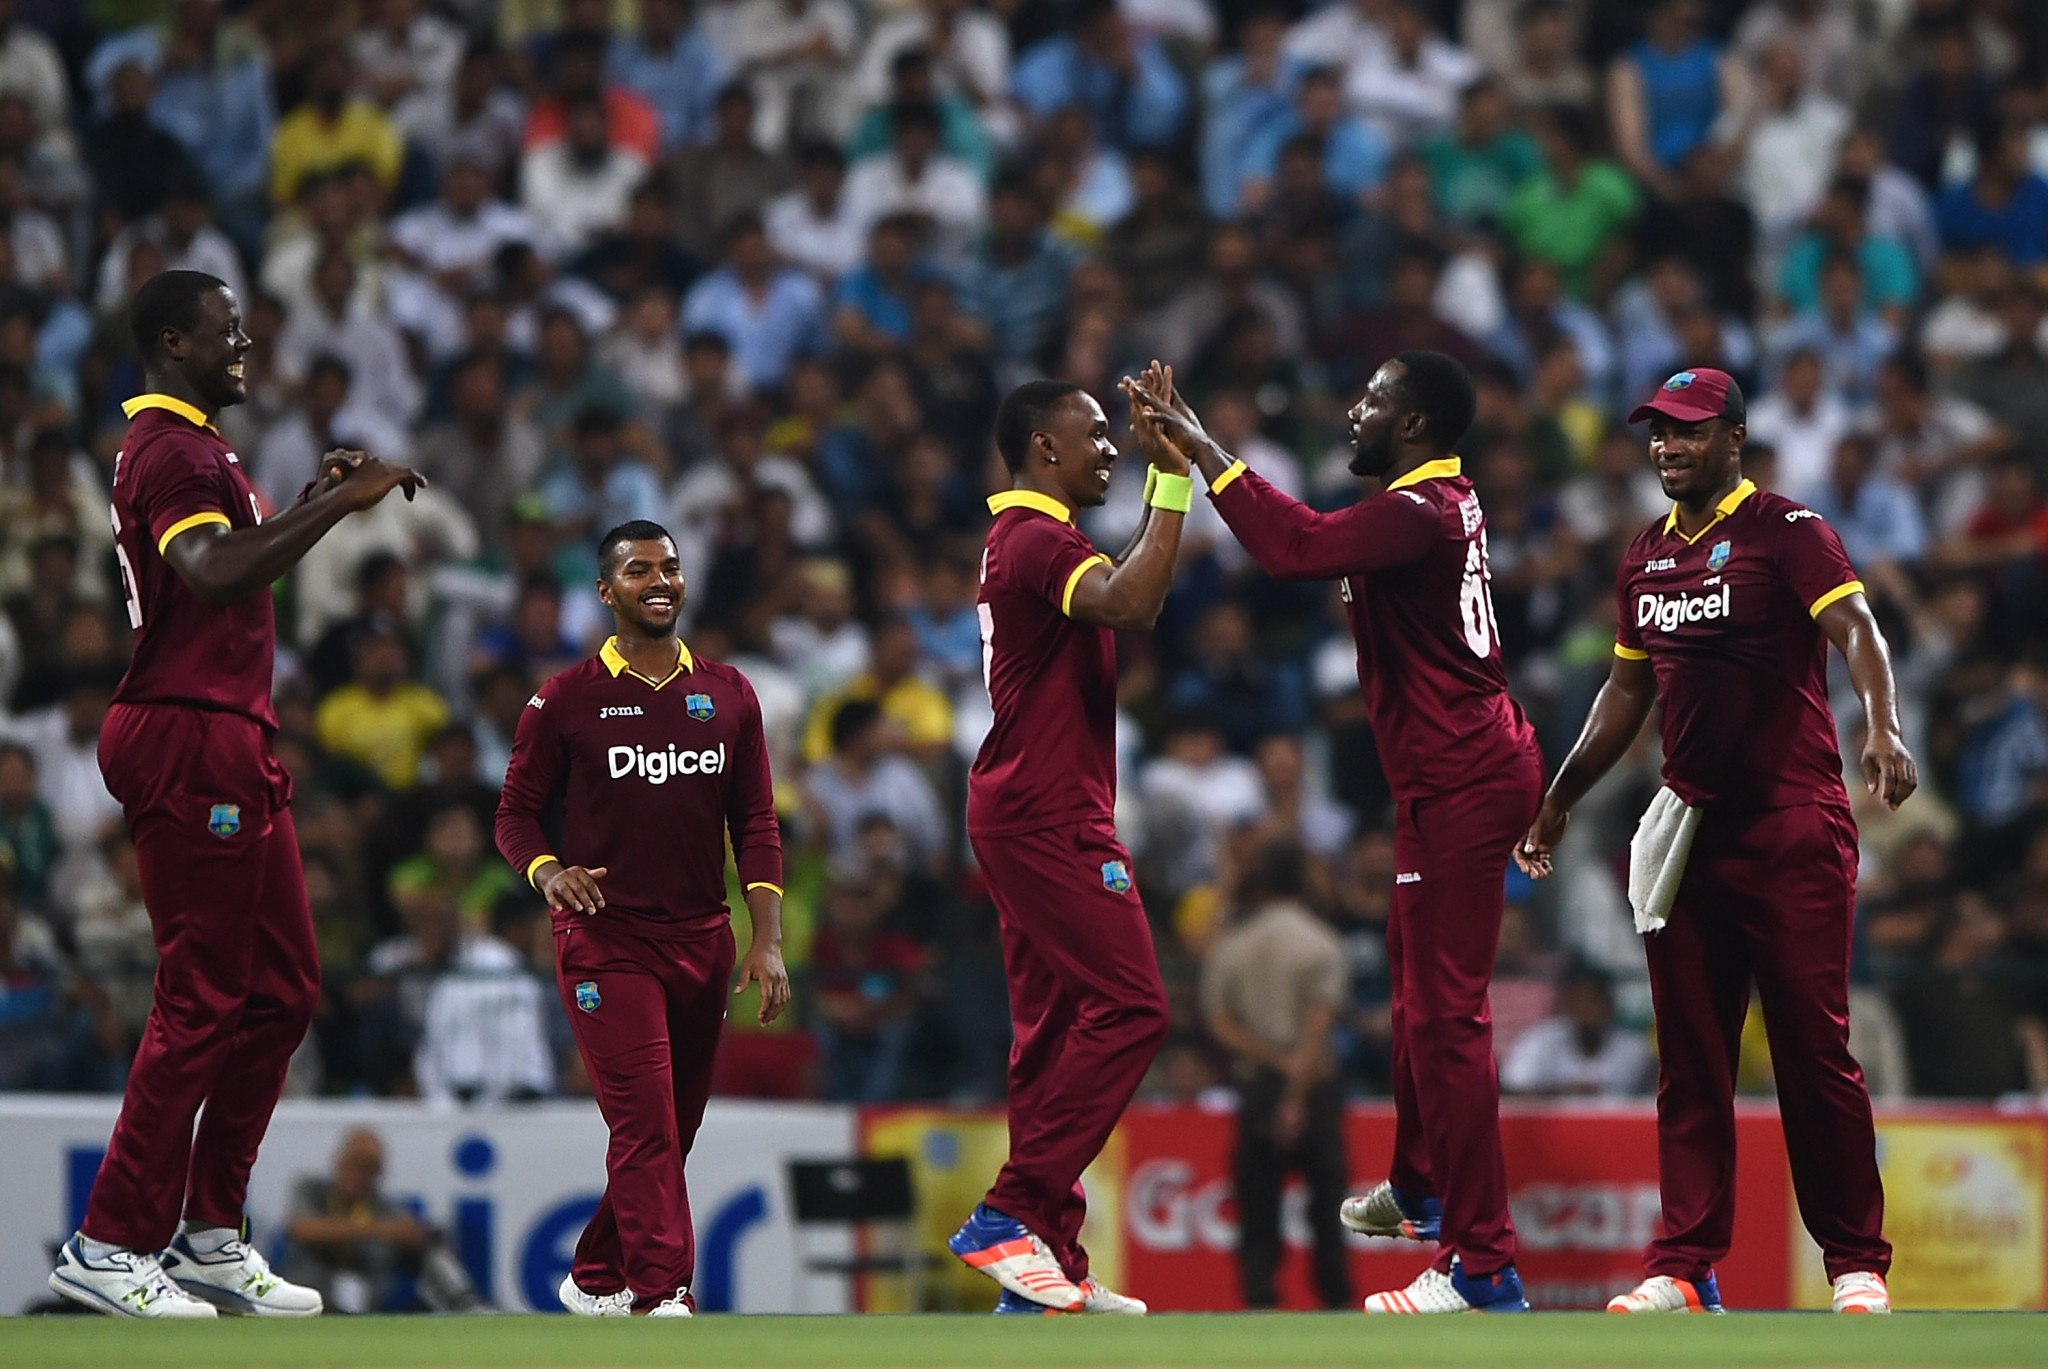 West Indies are the defending World T20 Champions ©Getty Images